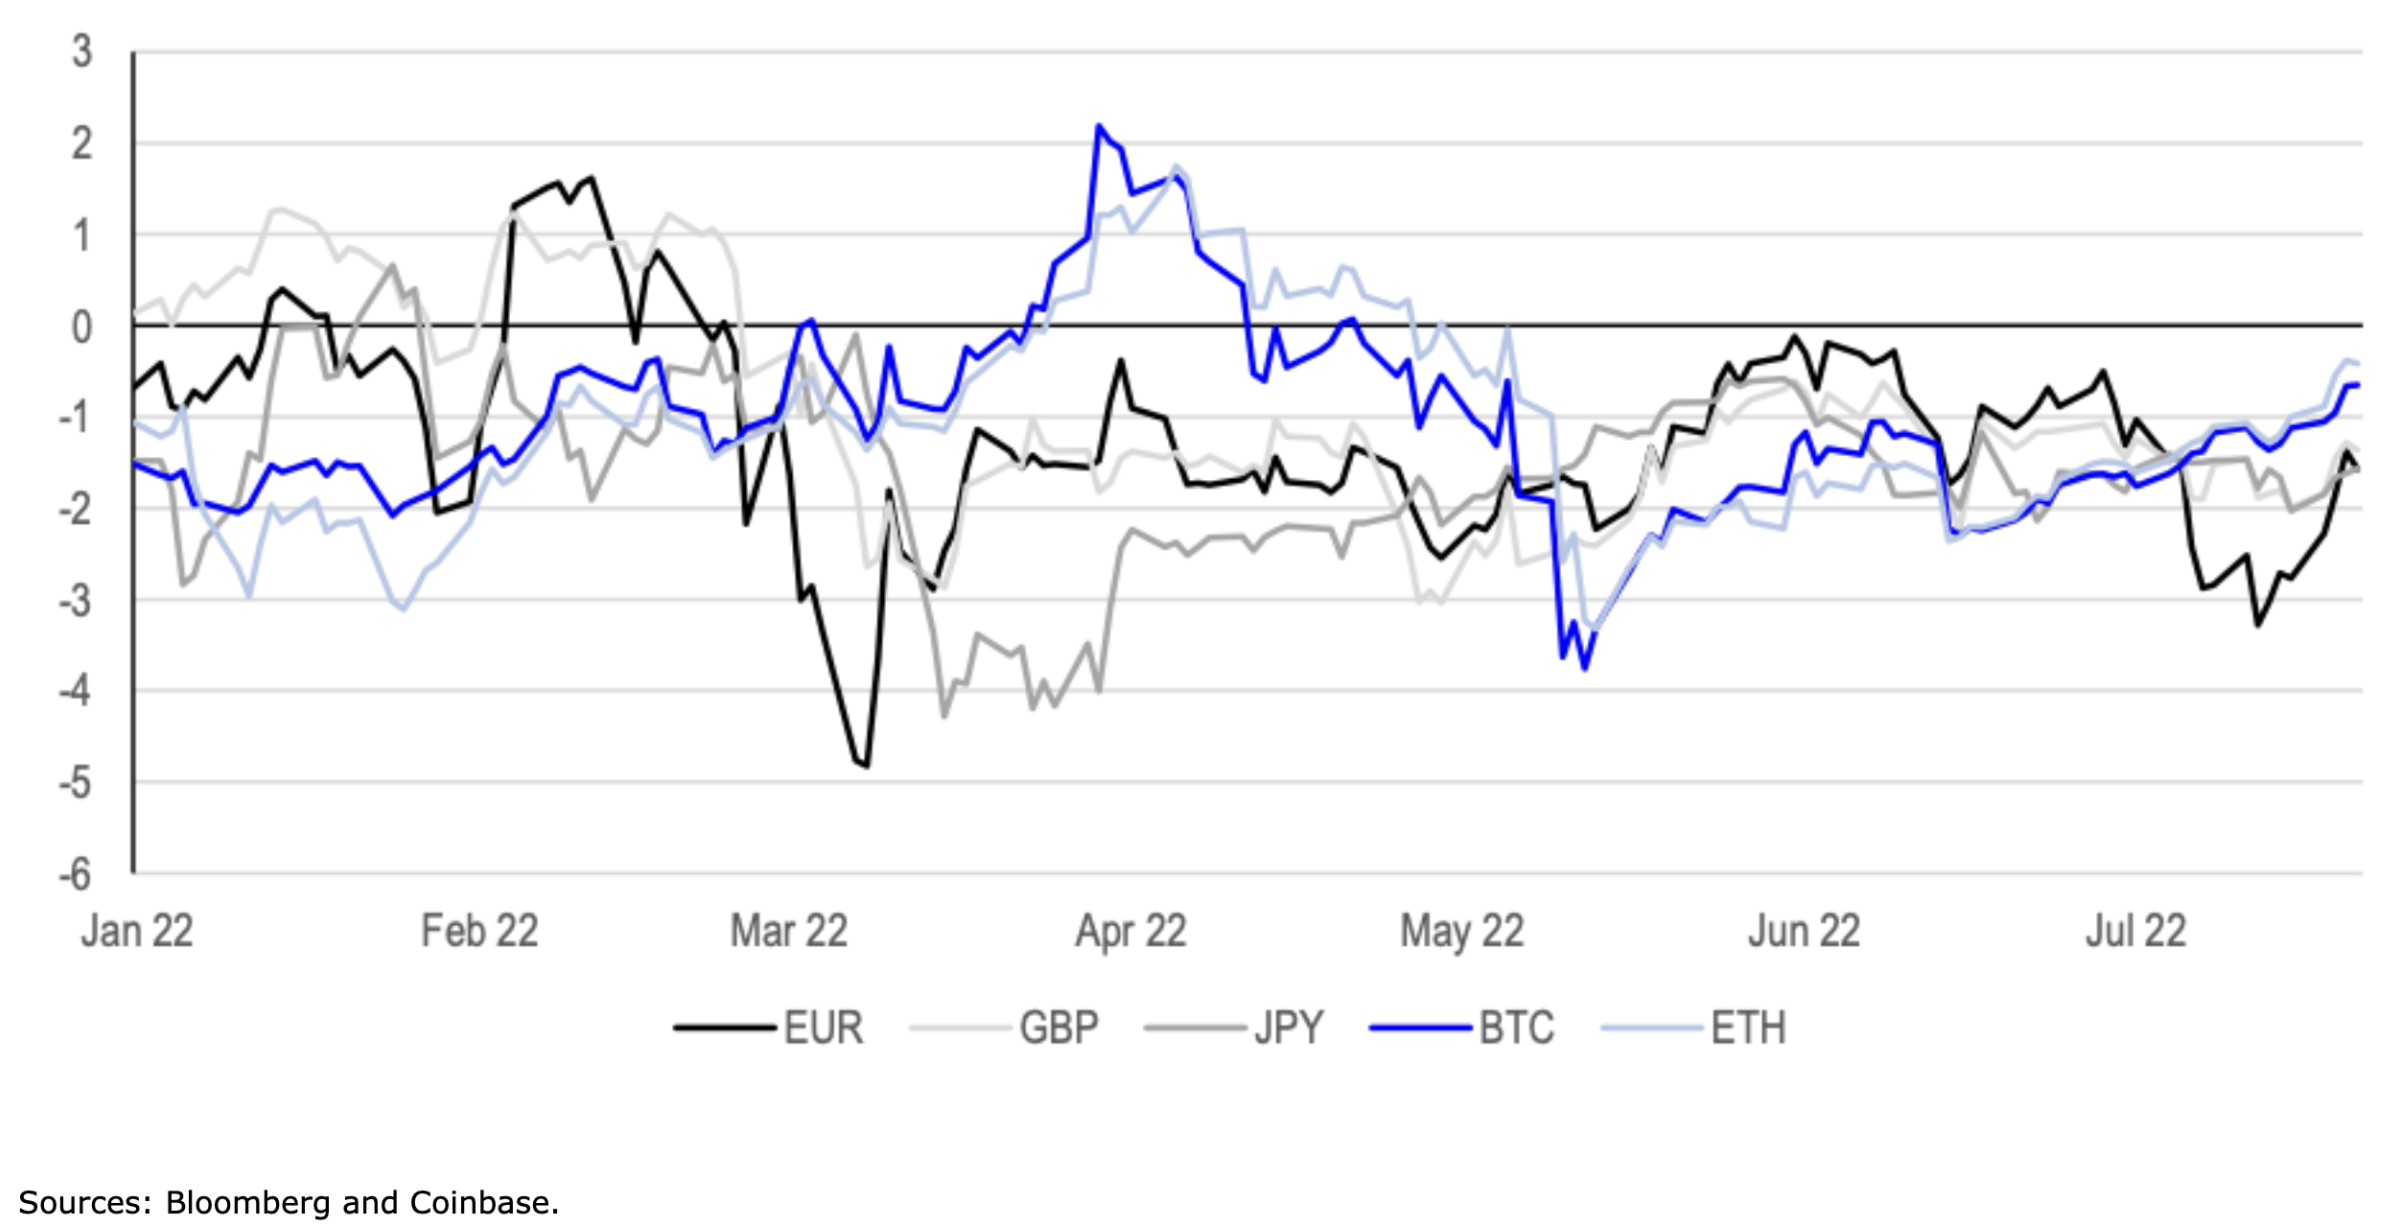 chart showing BTC and ETH outperforming EUR, GBP and JPY